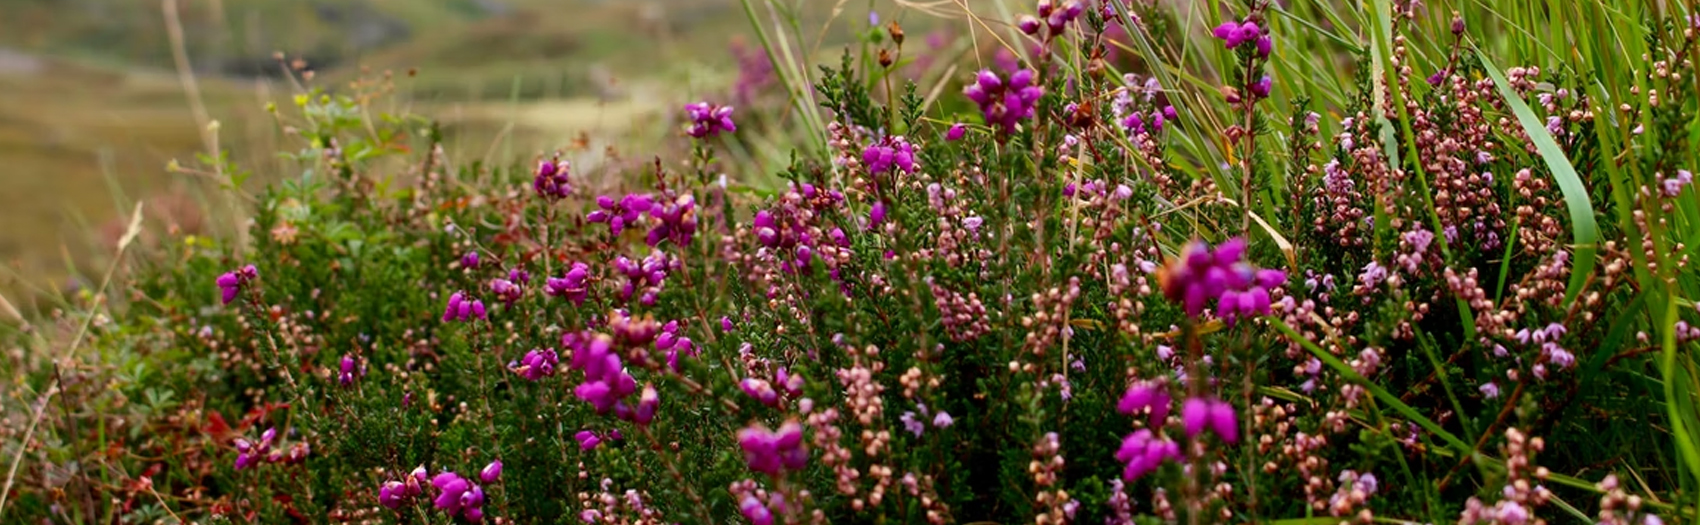 A field of pink and purple flowers with green wild grass